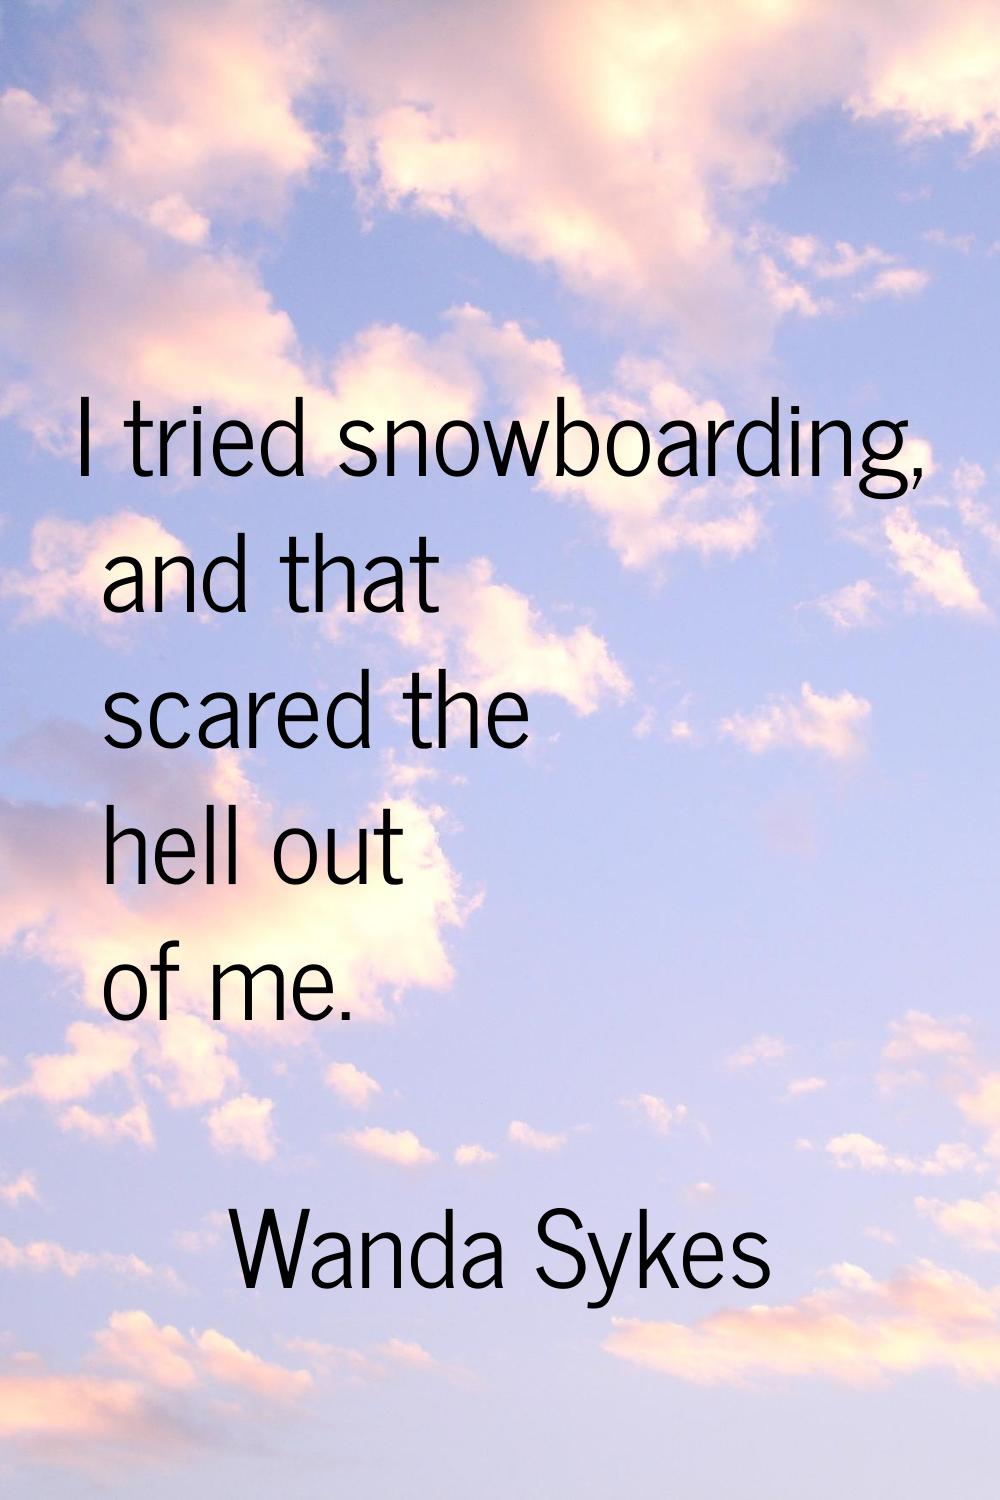 I tried snowboarding, and that scared the hell out of me.